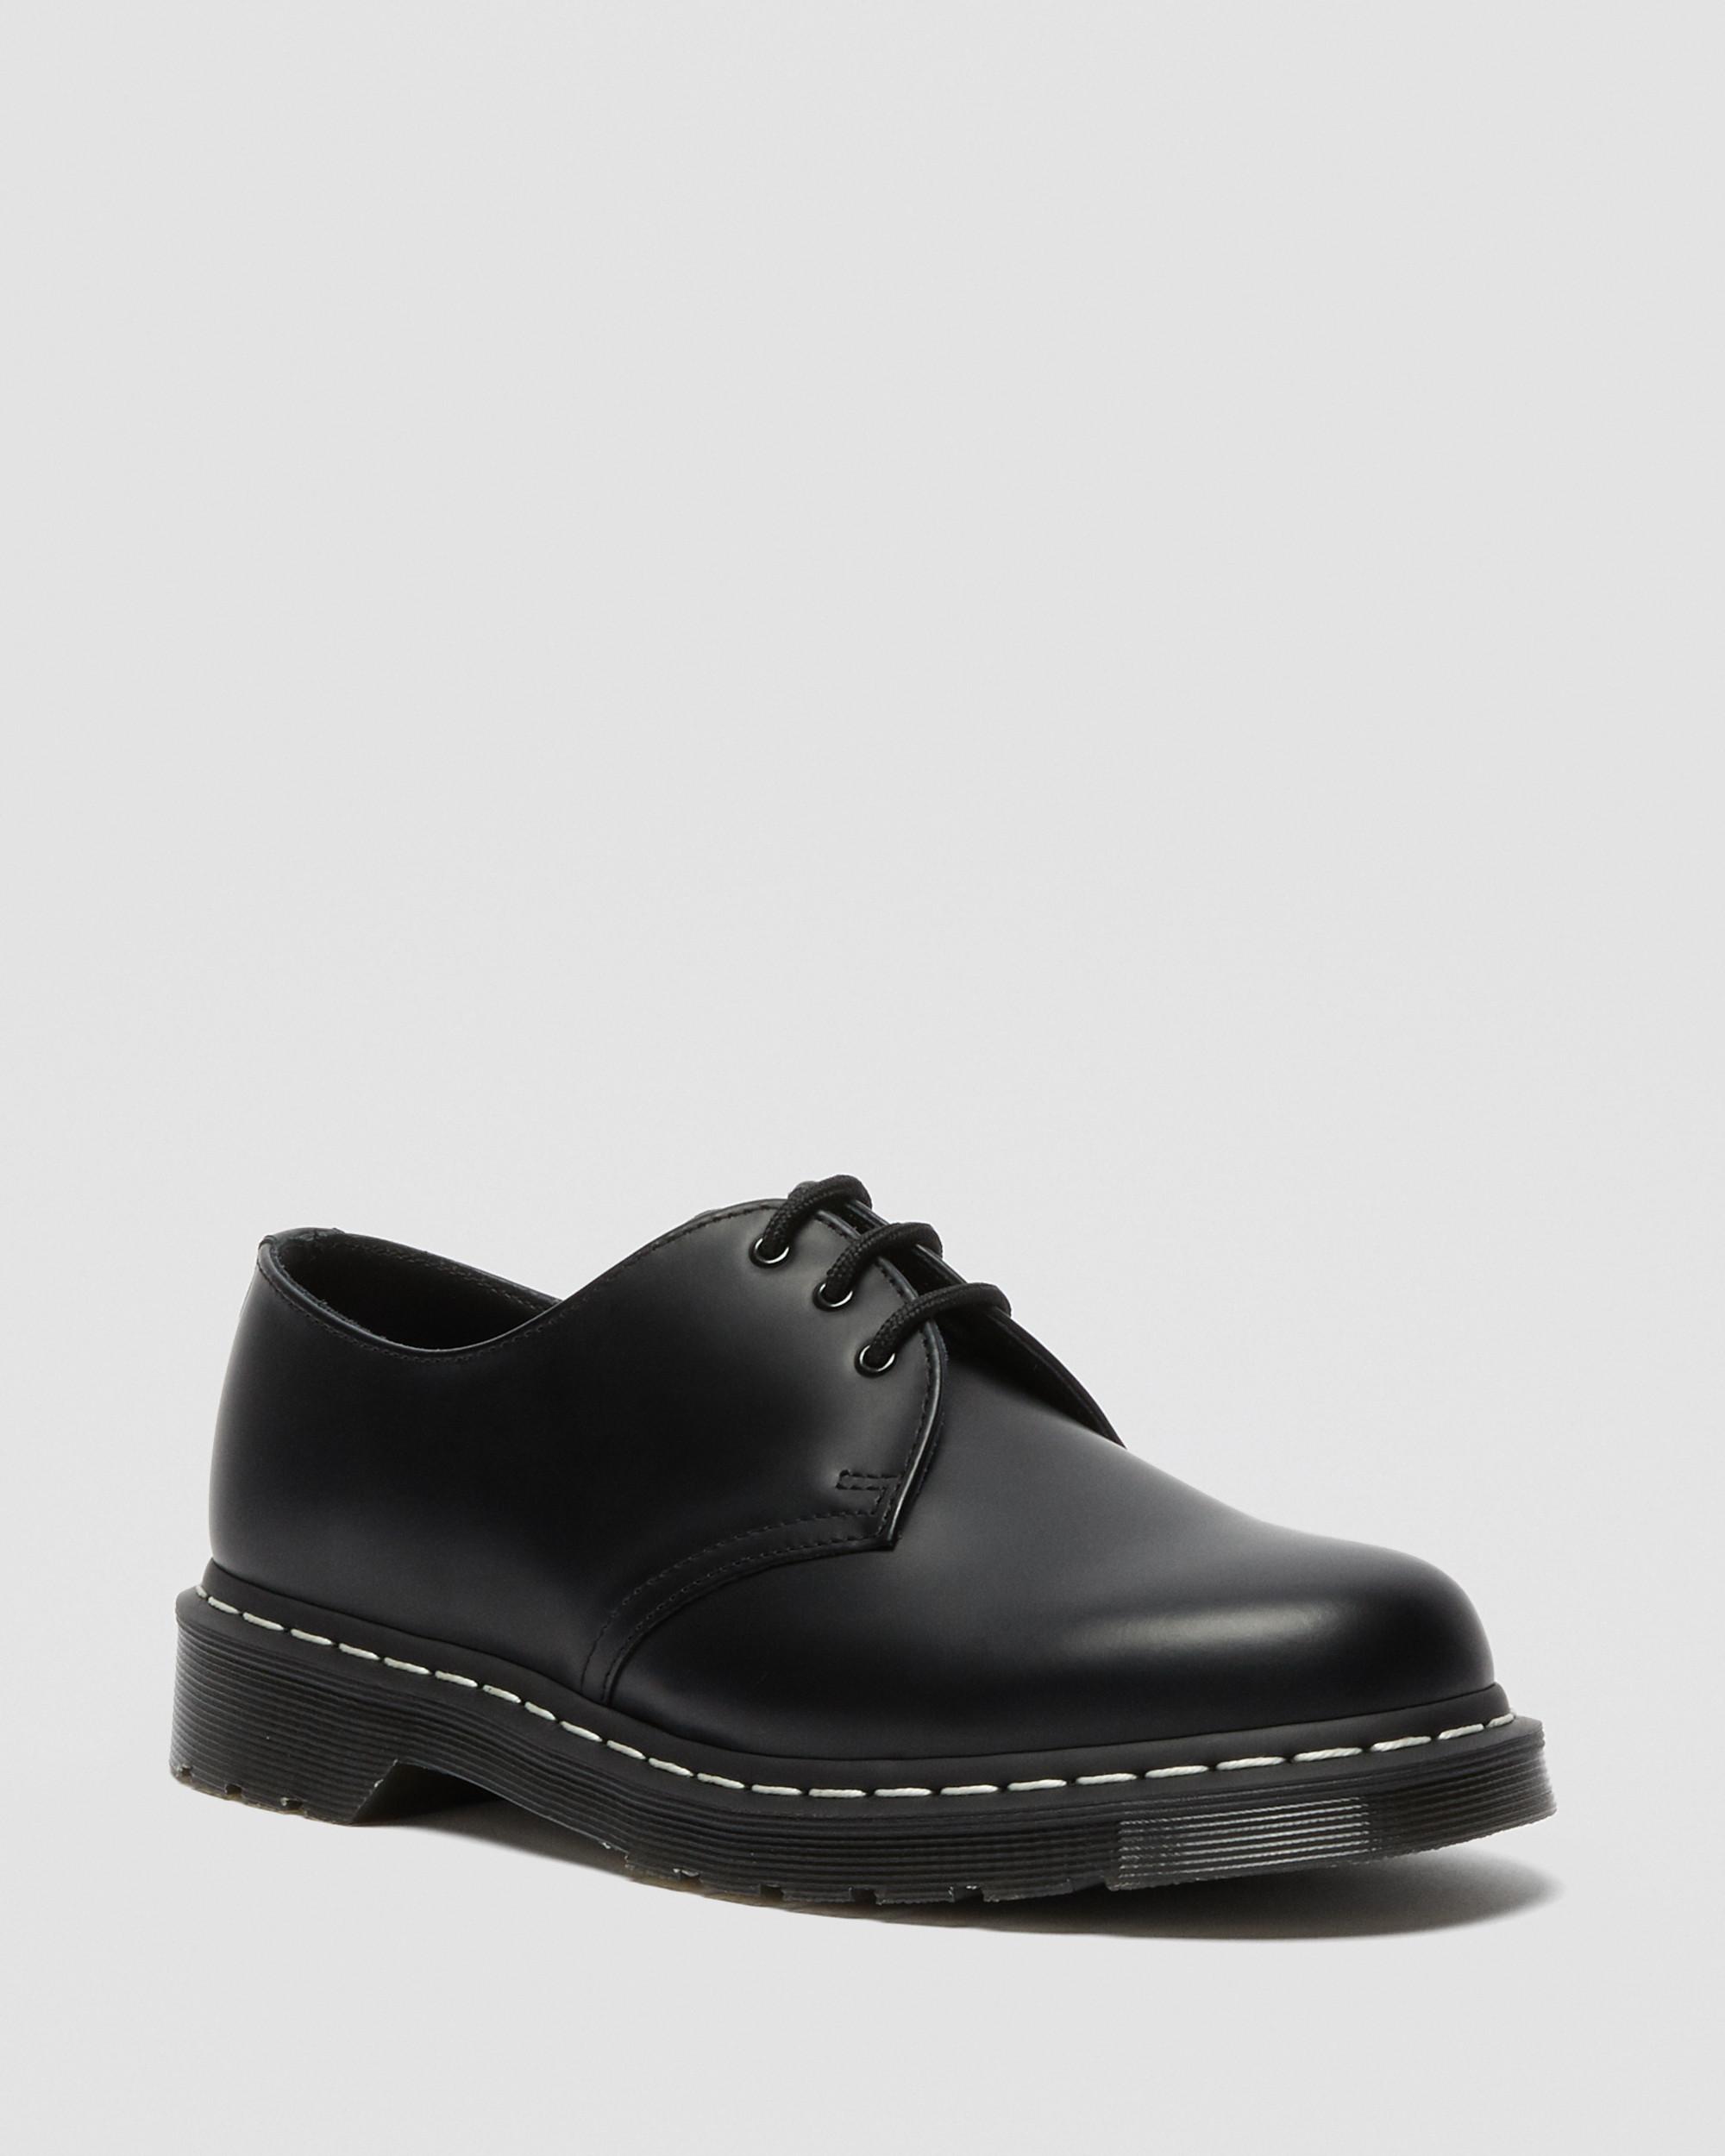 DR MARTENS 1461 Contrast Stitch Smooth Leather Oxford Shoes